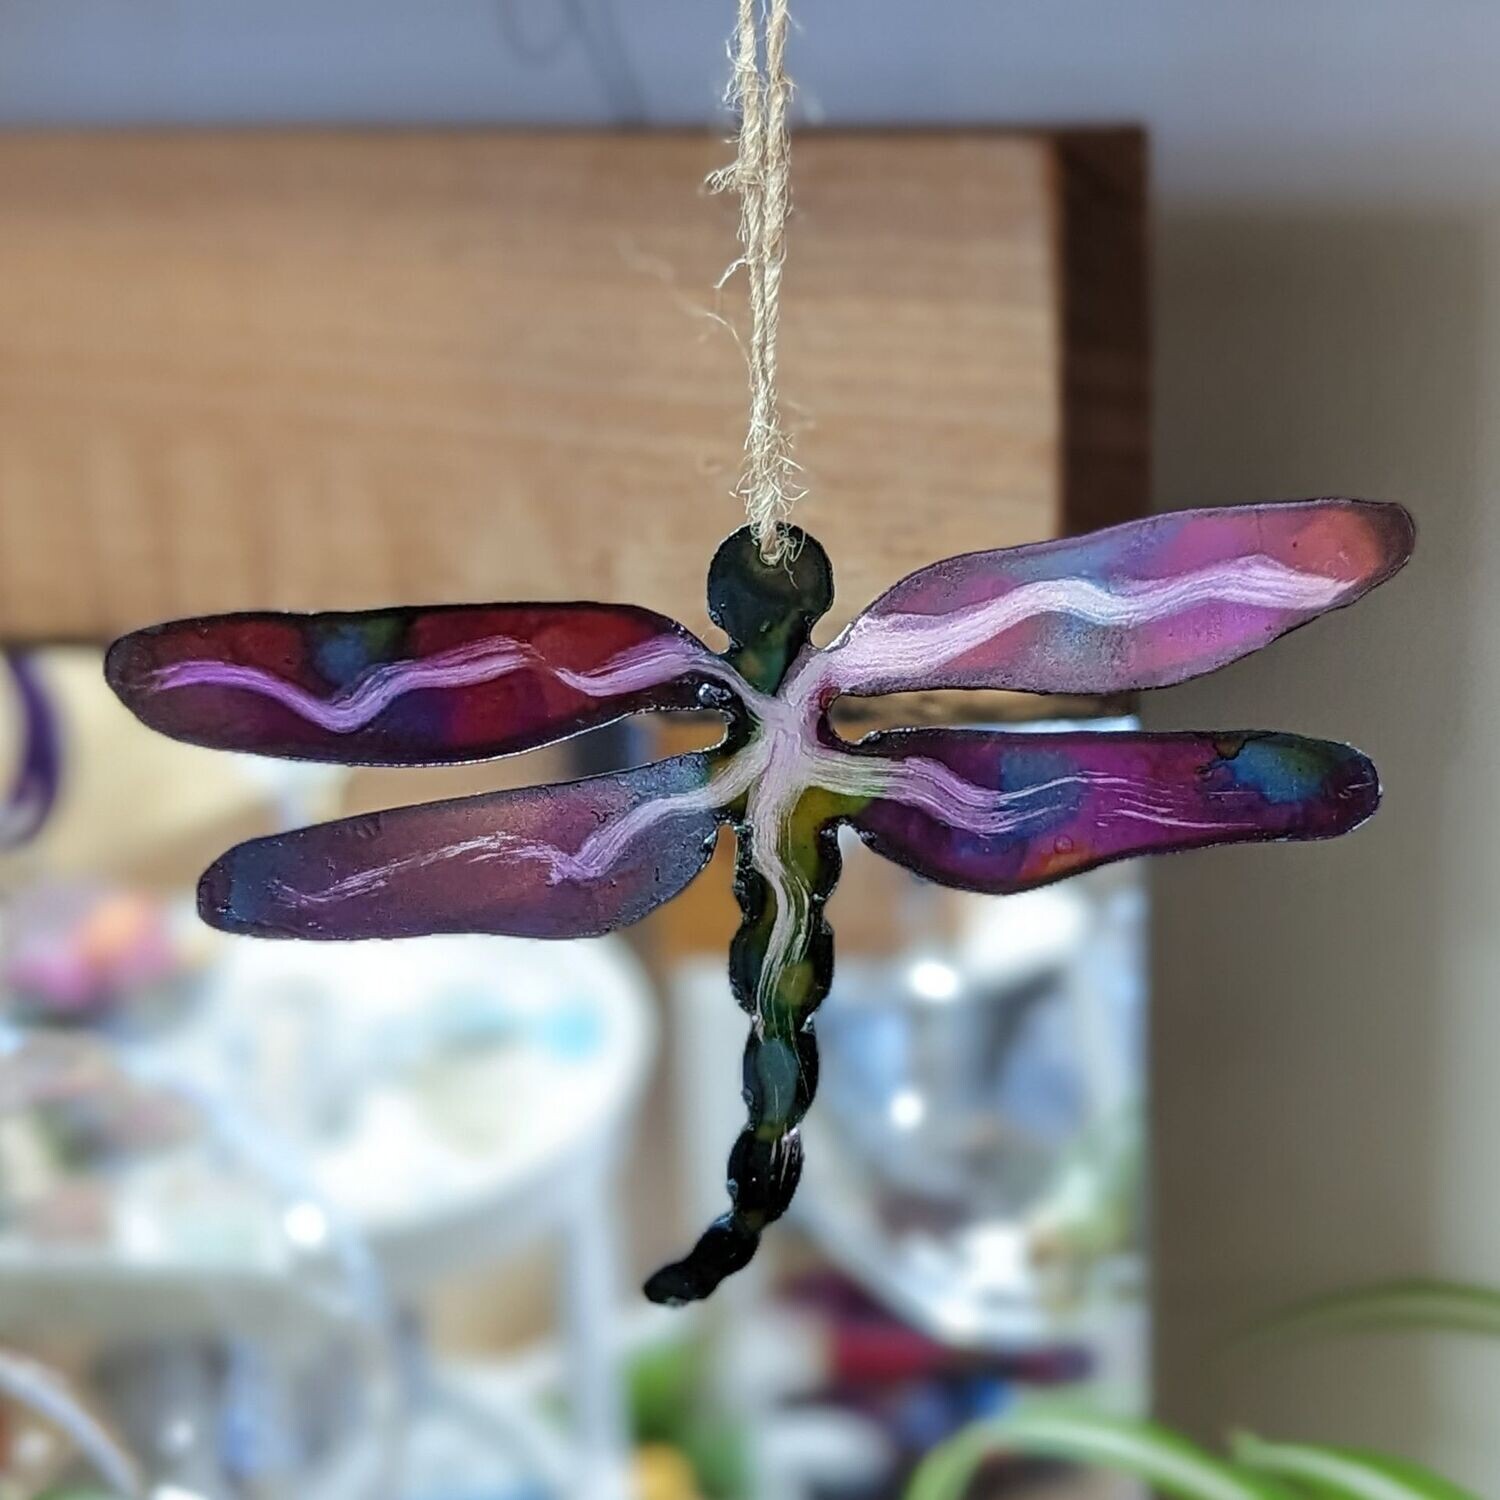 Painted Metal Dragonfly Ornament